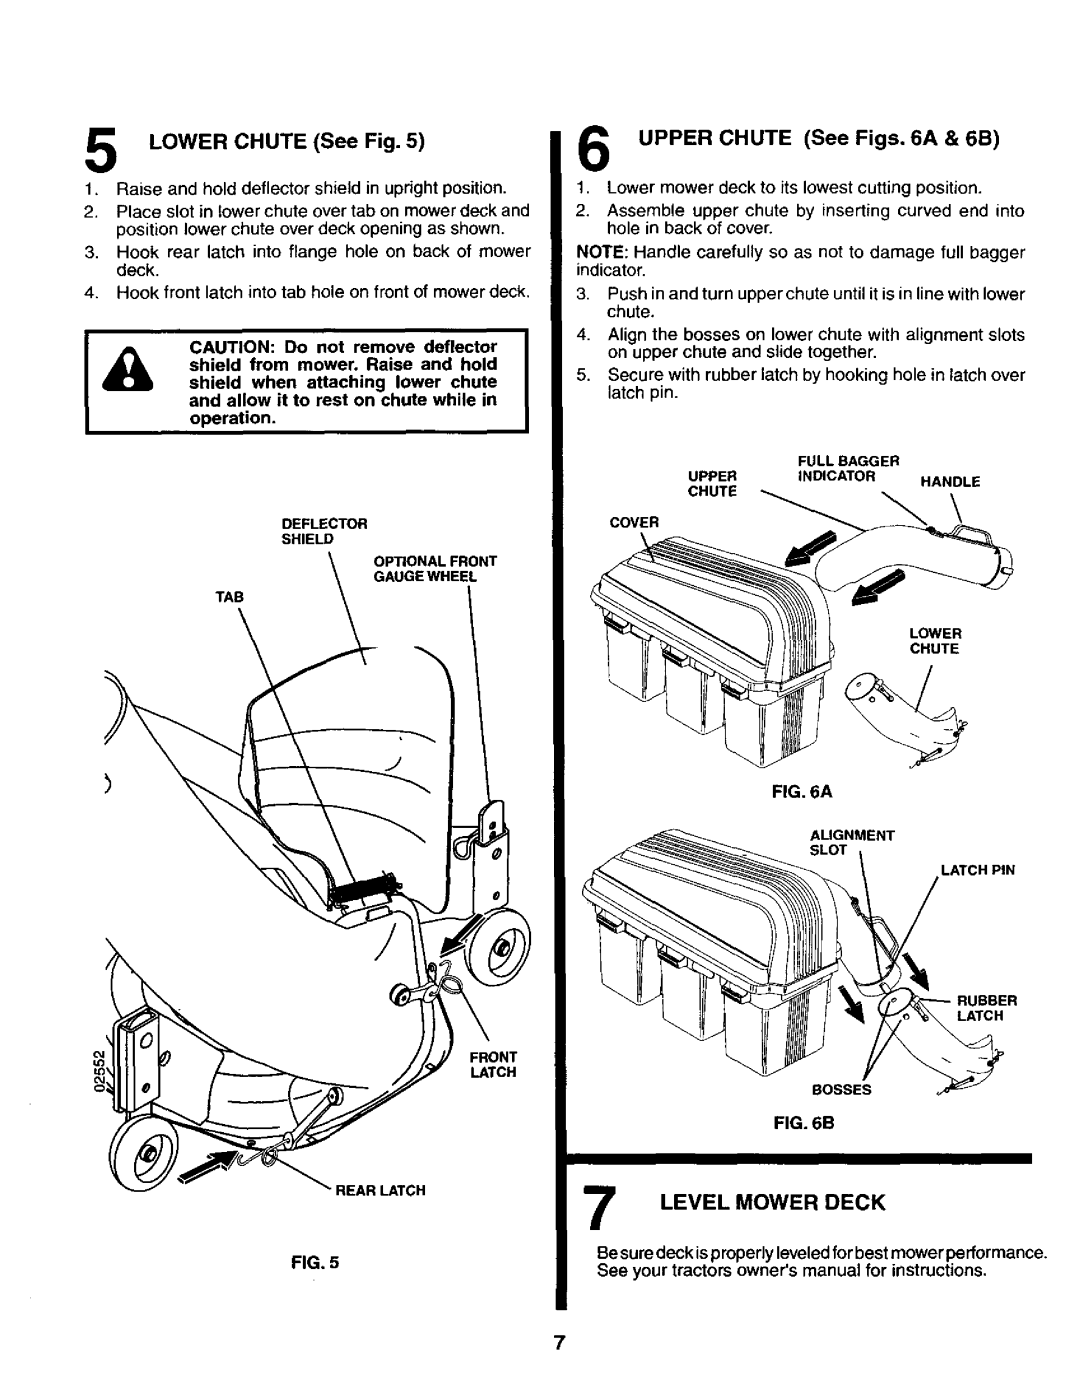 Craftsman 917.24985 owner manual LOWER CHUTE See Fig 